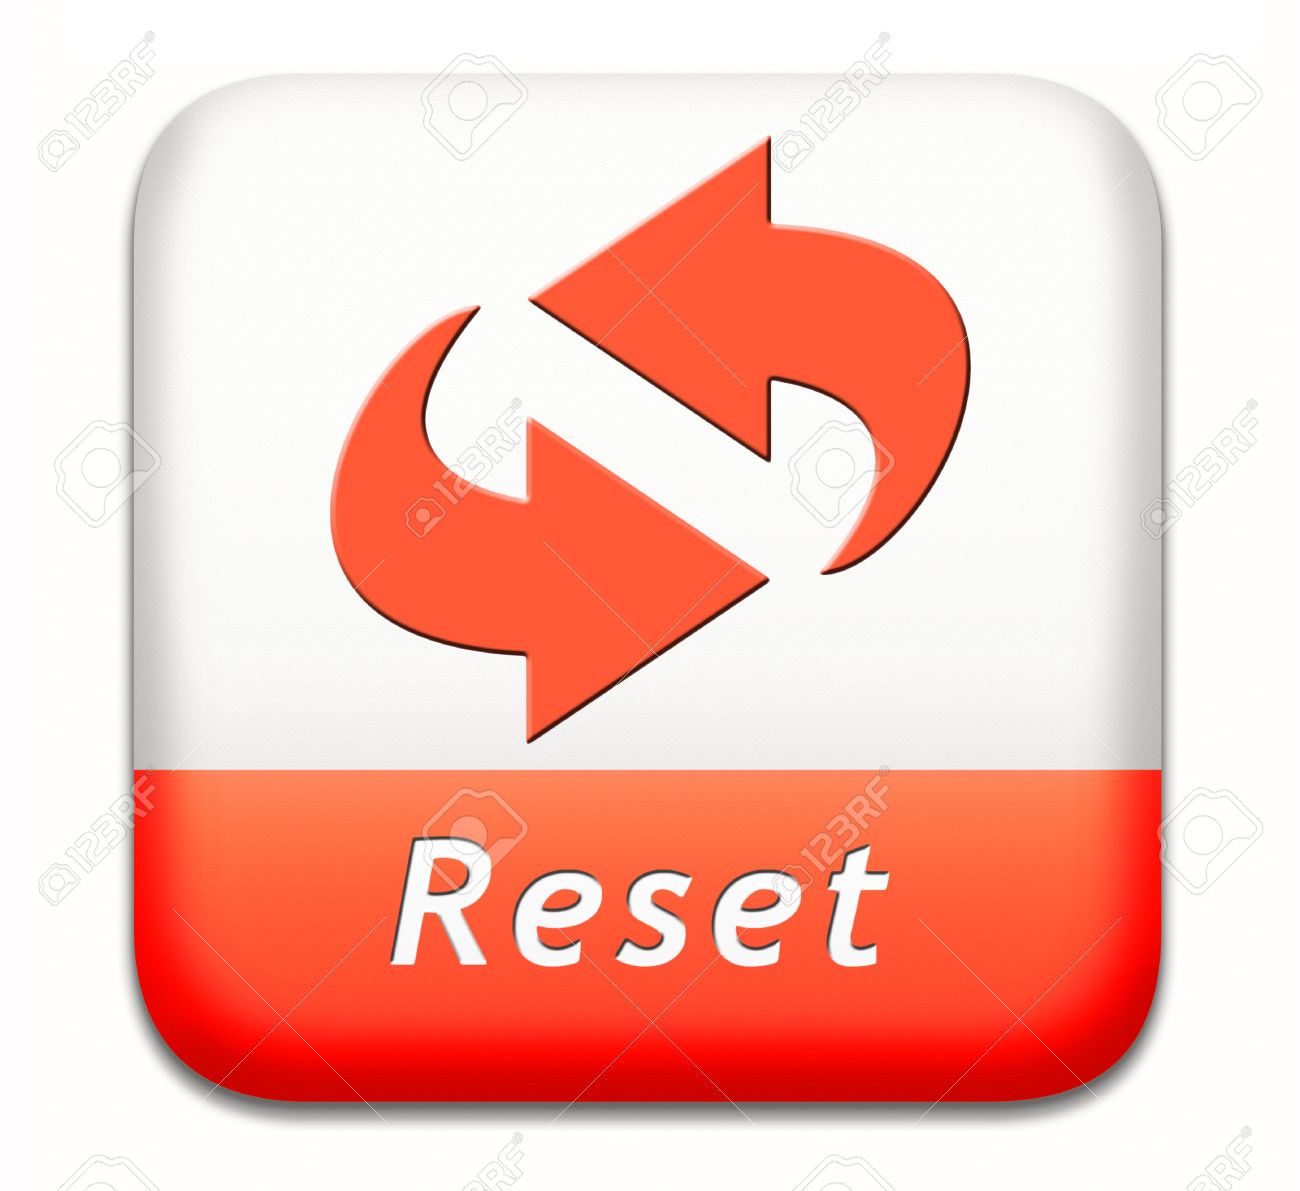 Reset button Stock Illustration Images. 3,761 Reset button 